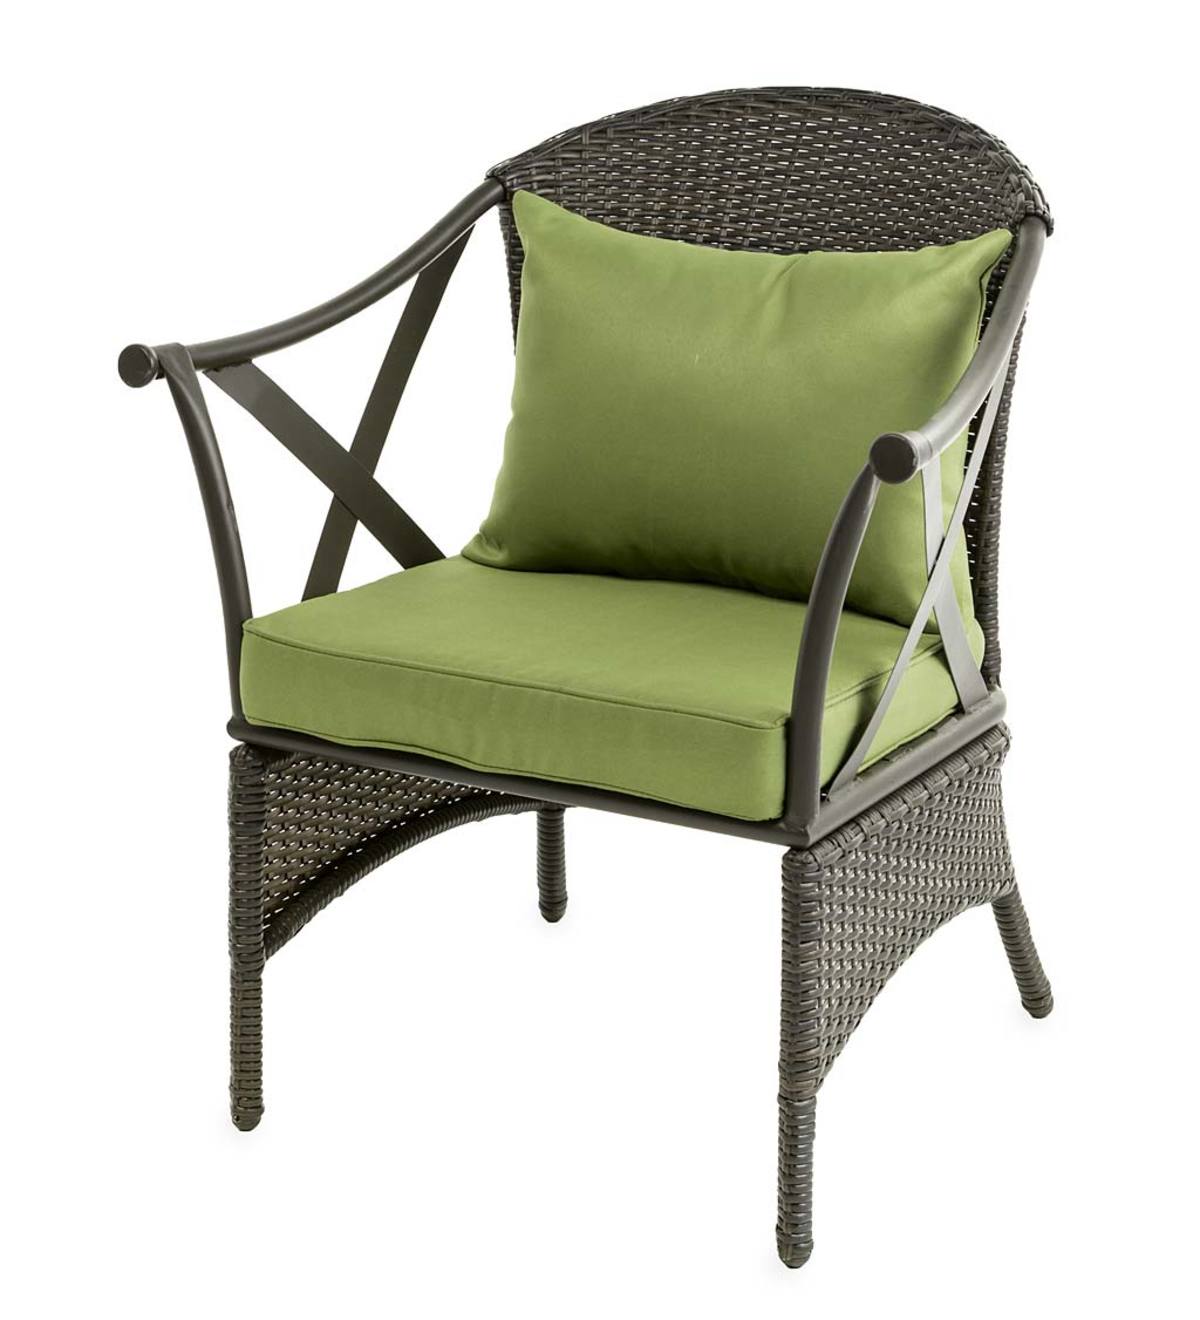 Wicker Patio Furniture Set with Cushions - Light Green | PlowHearth